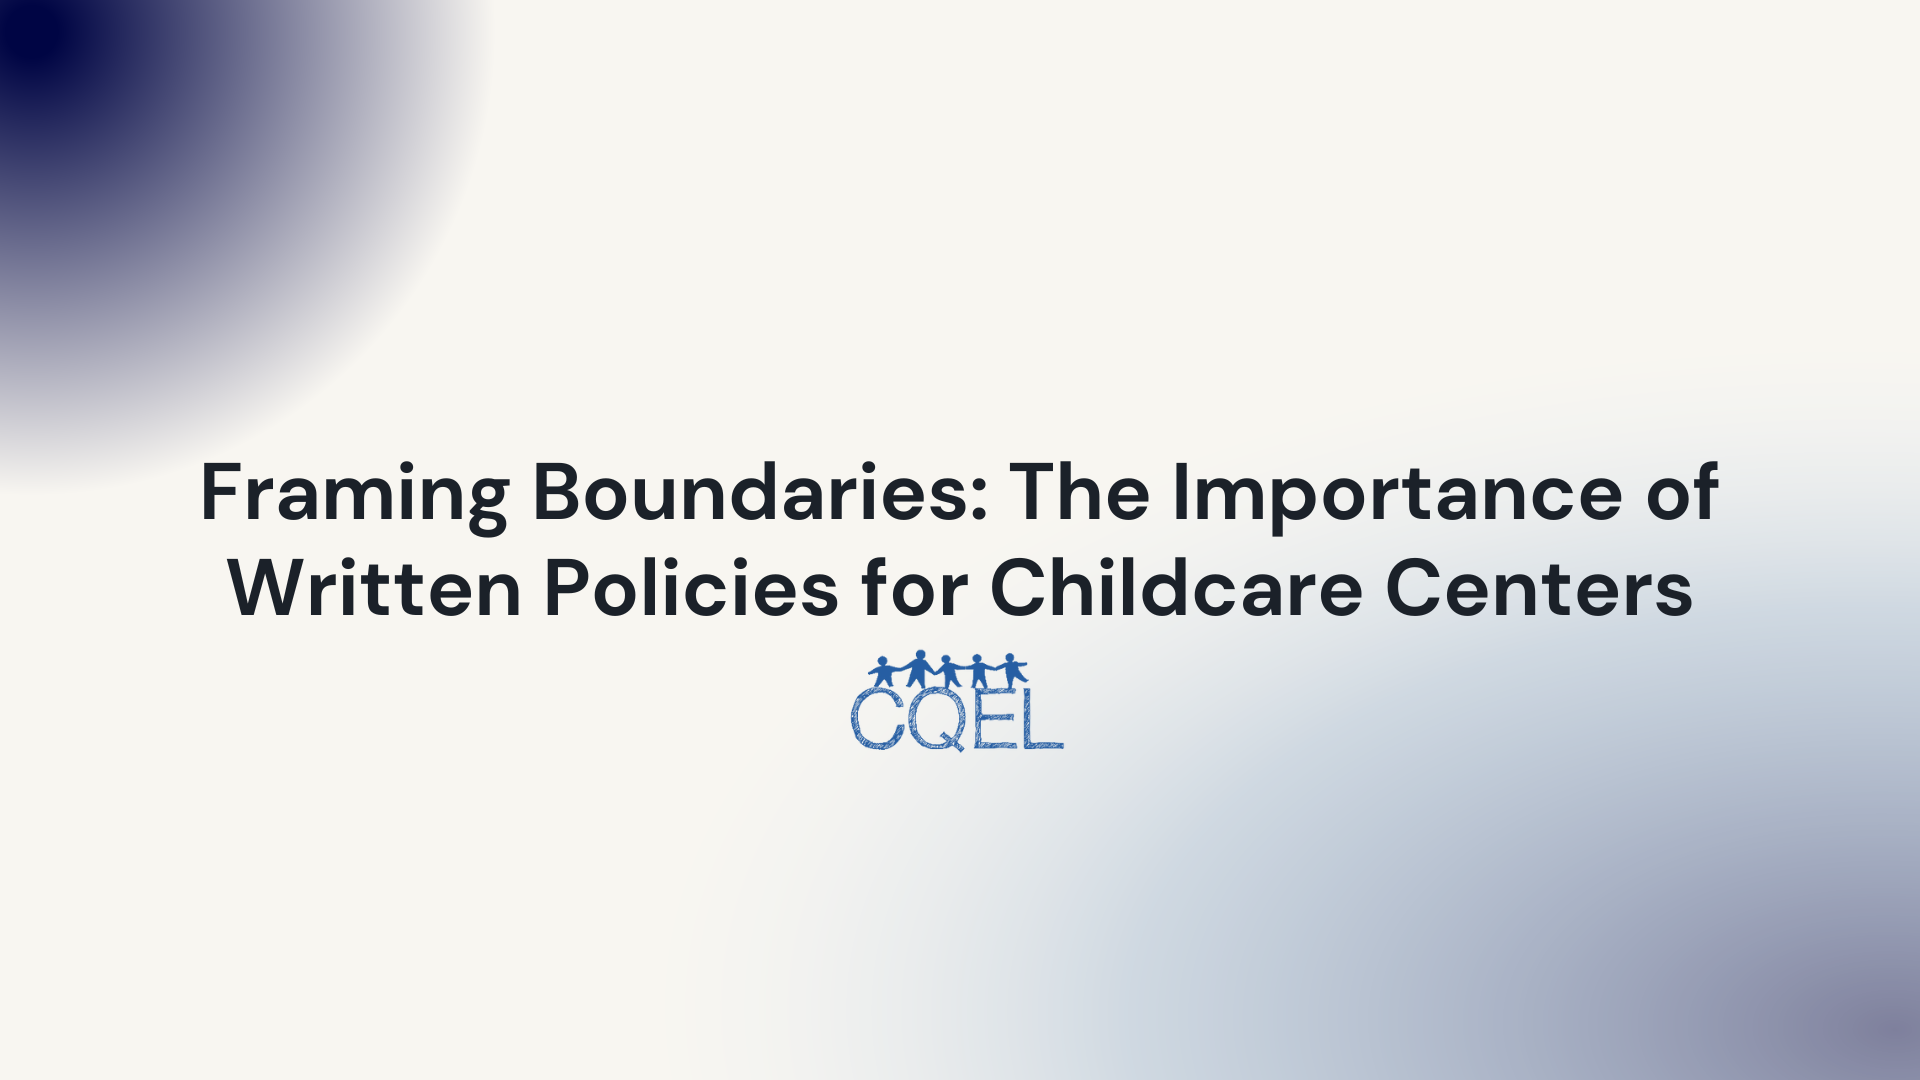 Framing Boundaries: The Importance of Written Policies for Childcare Centers